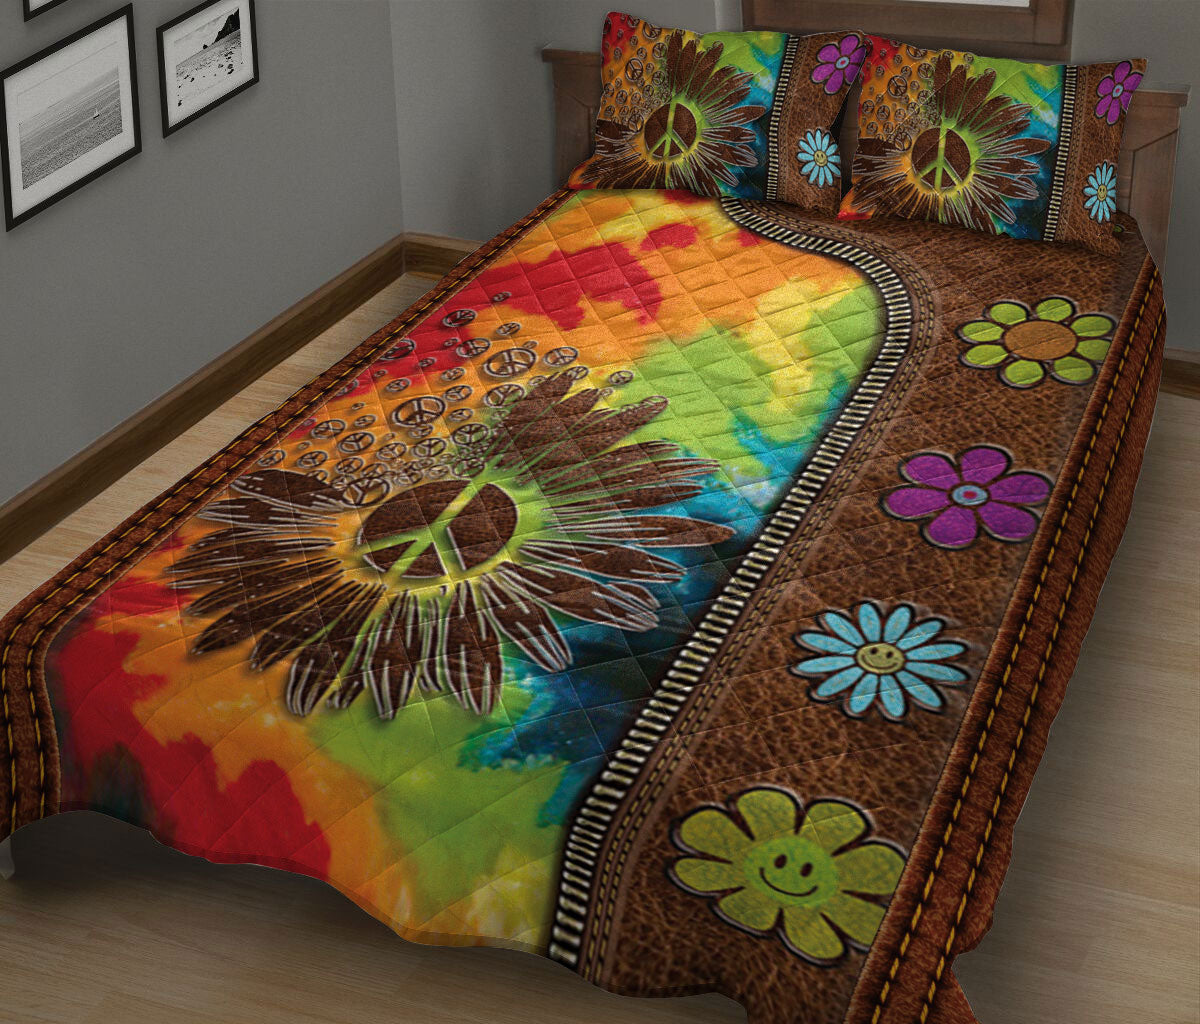 Ohaprints-Quilt-Bed-Set-Pillowcase-Daisy-Flower-Tie-Dye-Hippie-Peace-Sign-Floral-Brown-Pattern-Blanket-Bedspread-Bedding-1478-King (90'' x 100'')